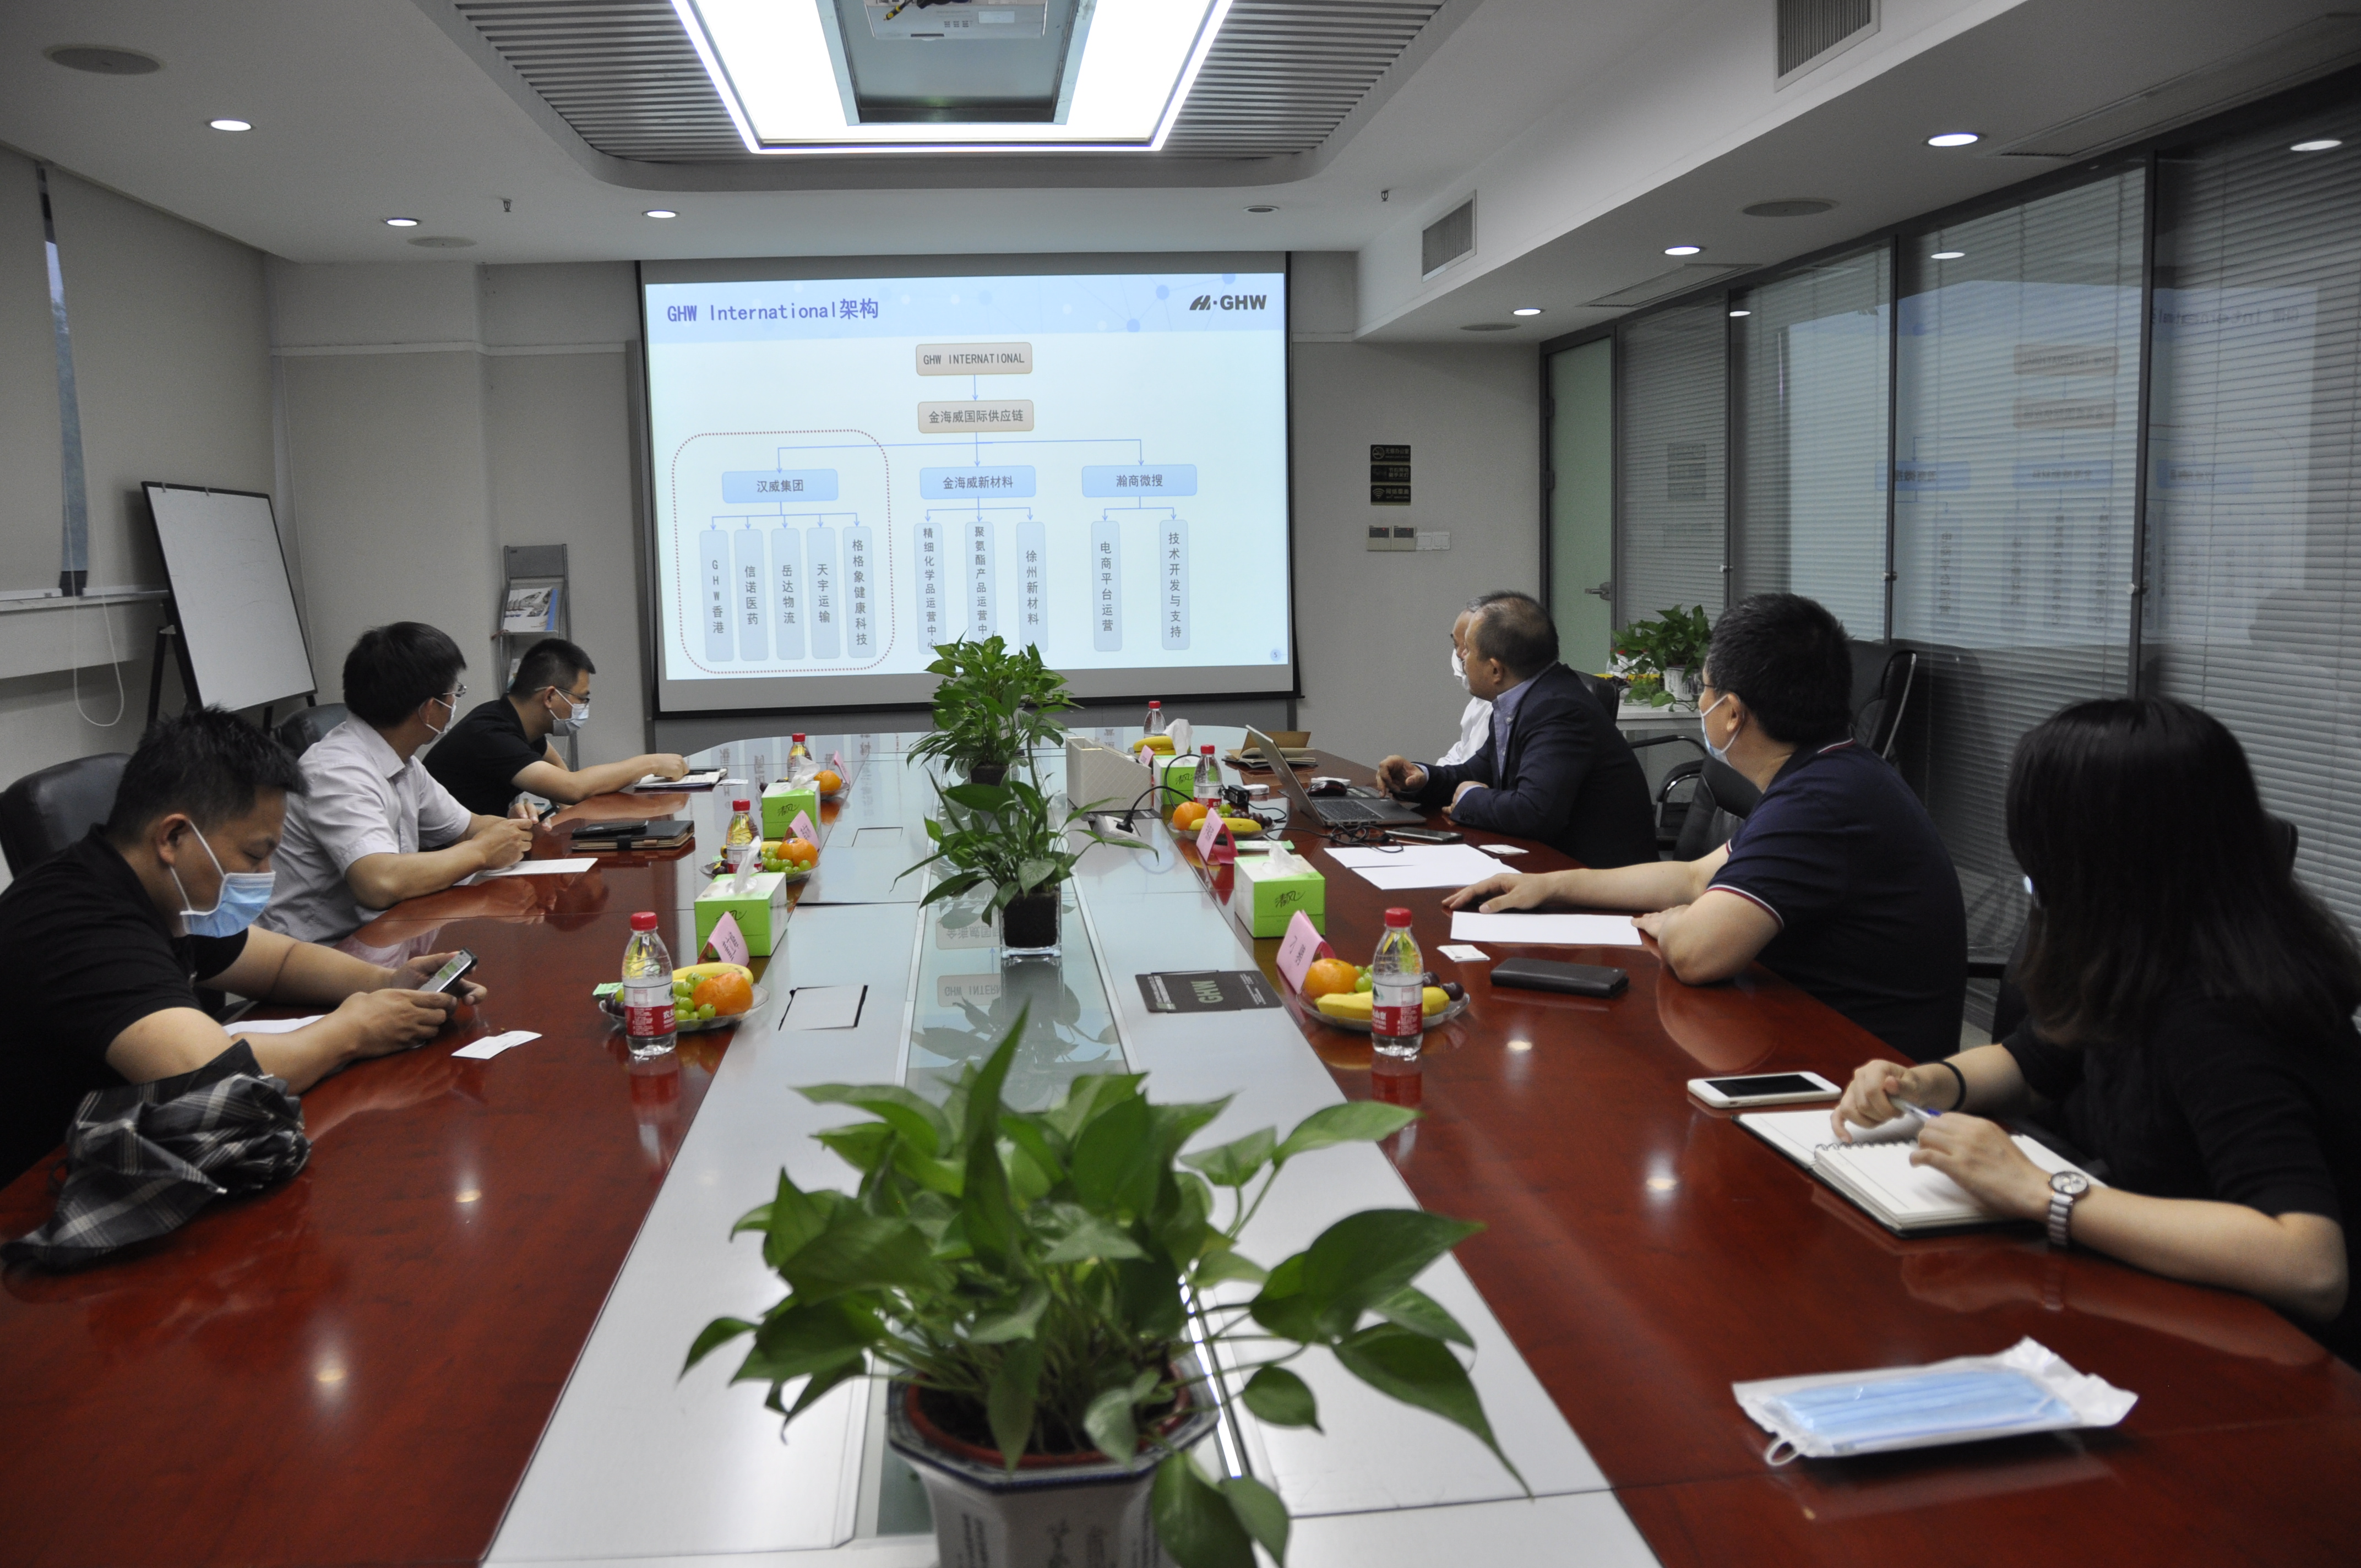 Chenglin Gong, Member of the Standing Committee of Jianye District Committee and Executive Deputy Head of Jianye District, Visited the Headquarters of GHW International Group for Investigation